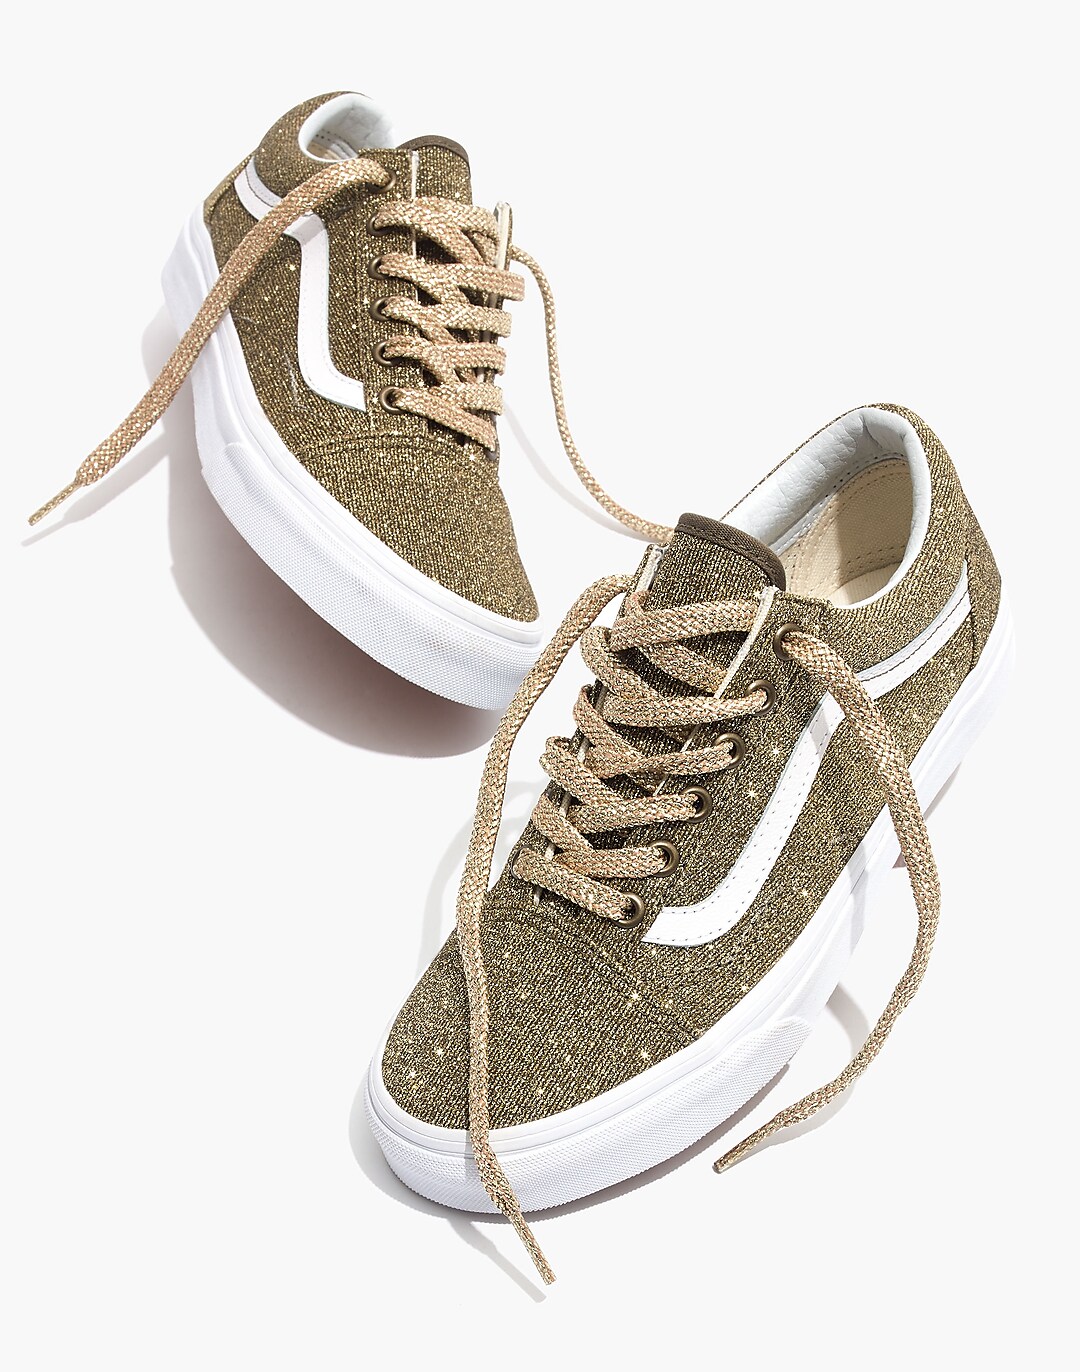 Vans® Unisex Old Skool Lace-Up Glitter Gold Sneakers in